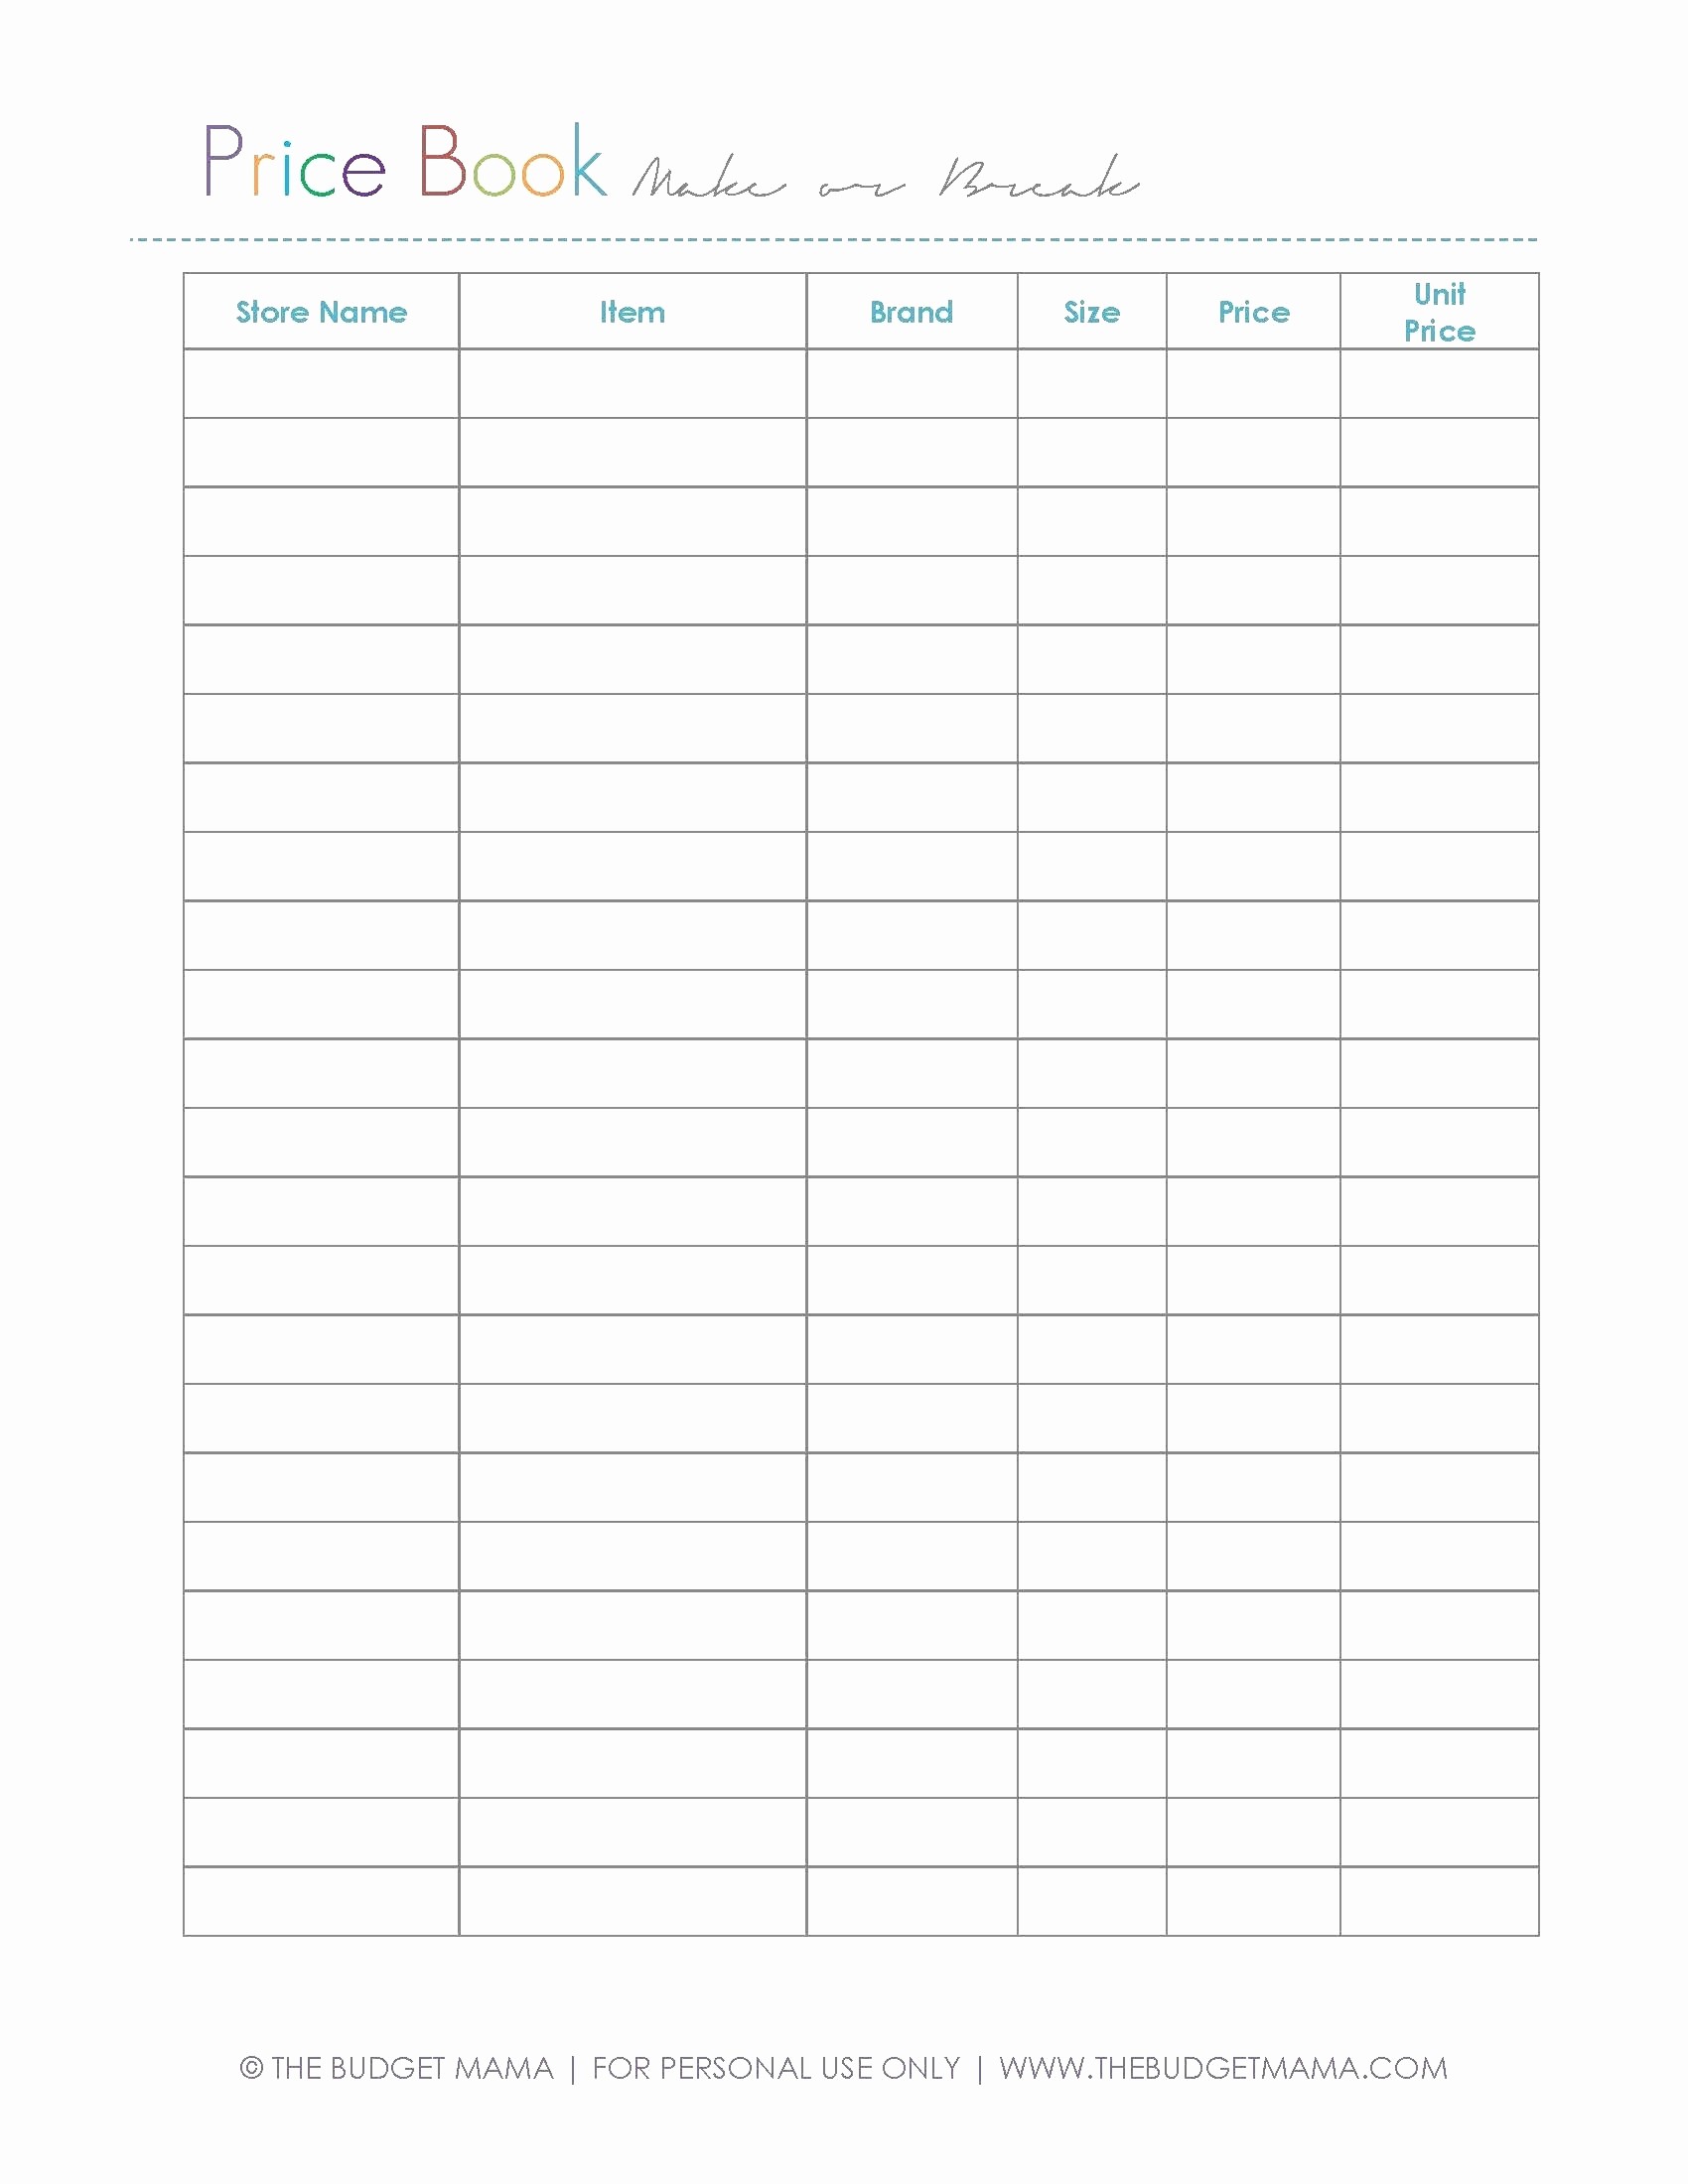 Grocery List Price Comparison Spreadsheet Awesome Document